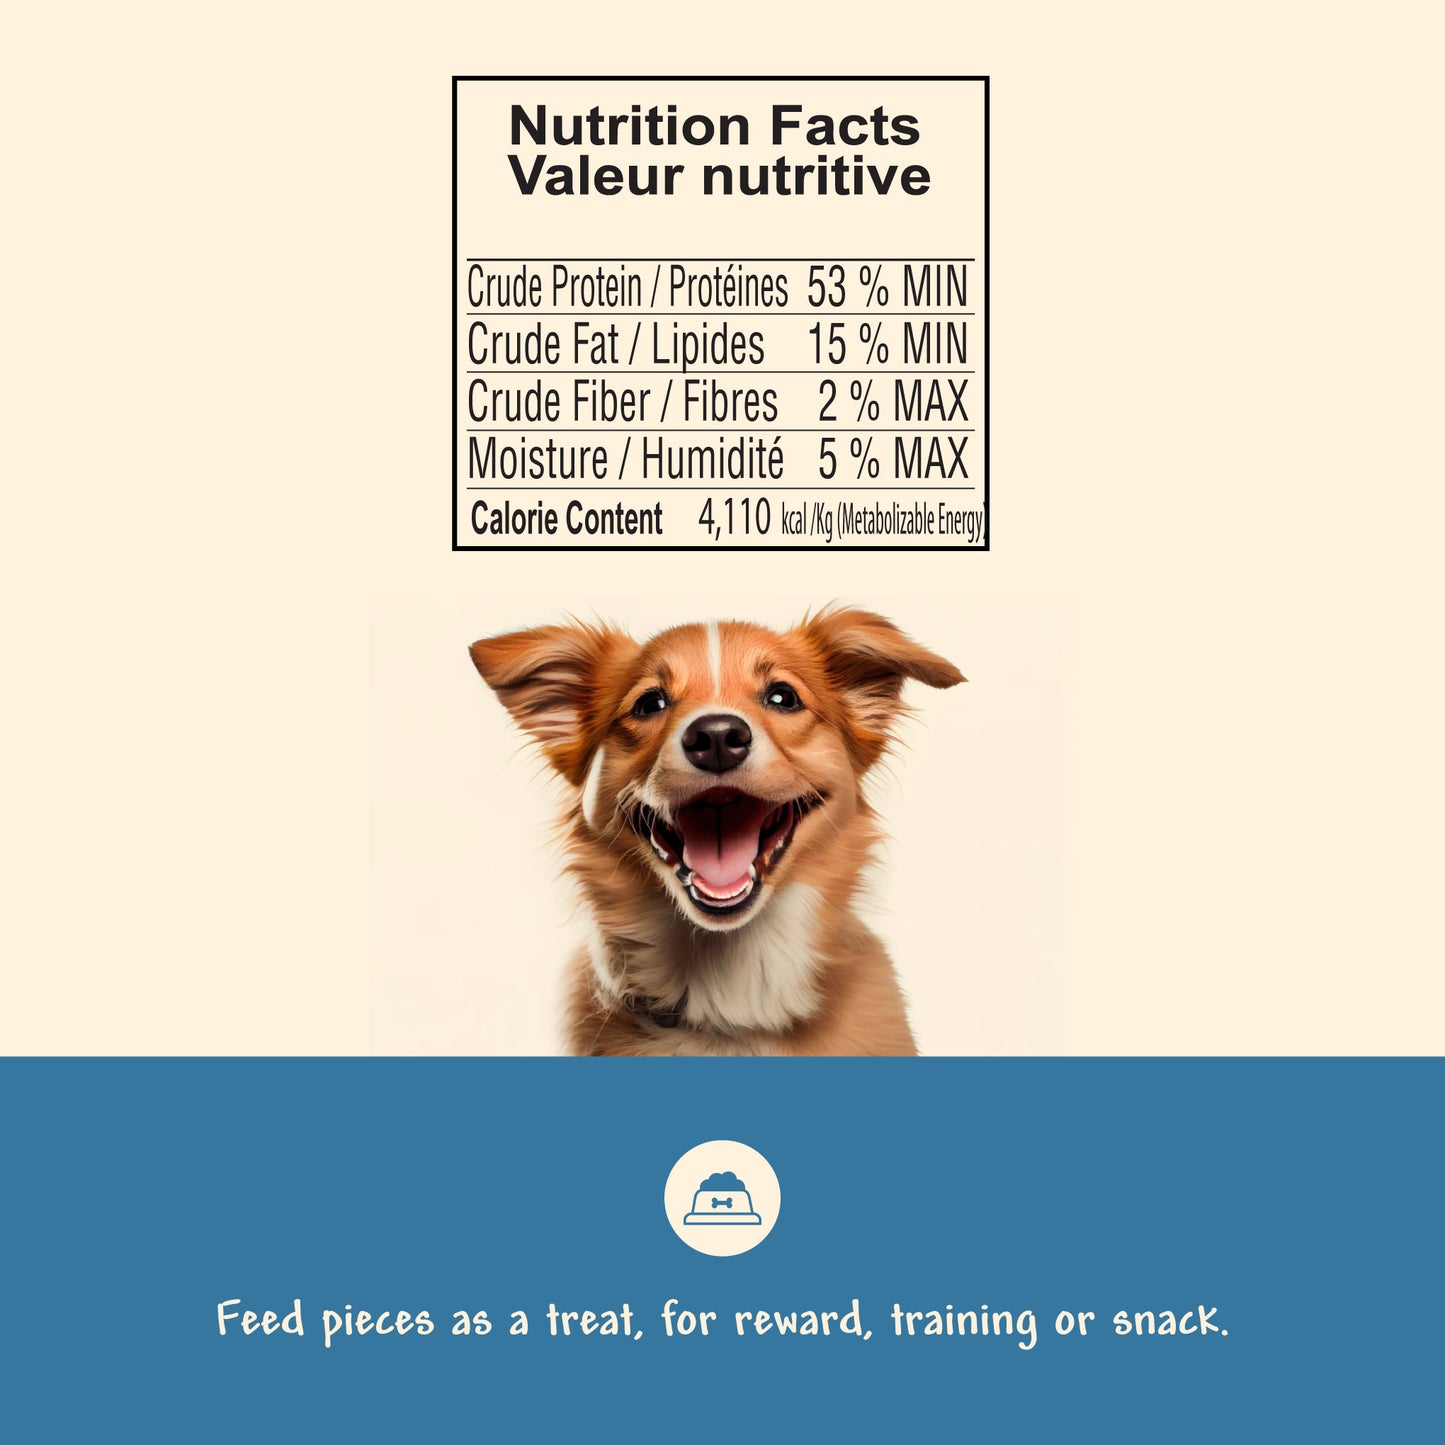 nutrition facts and directions to feed pieces as a treat, reward, training or snack for dogs